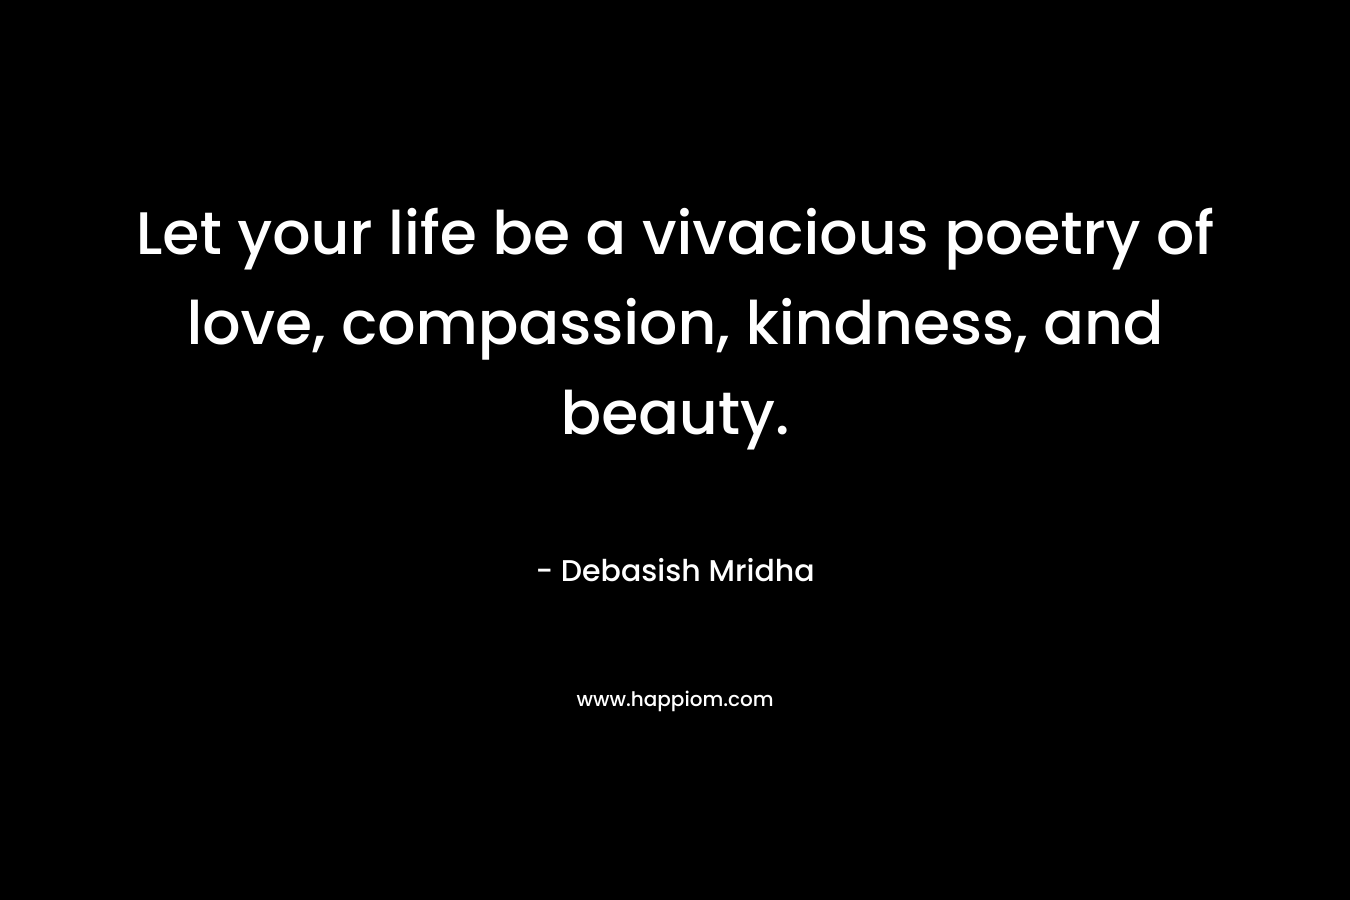 Let your life be a vivacious poetry of love, compassion, kindness, and beauty.